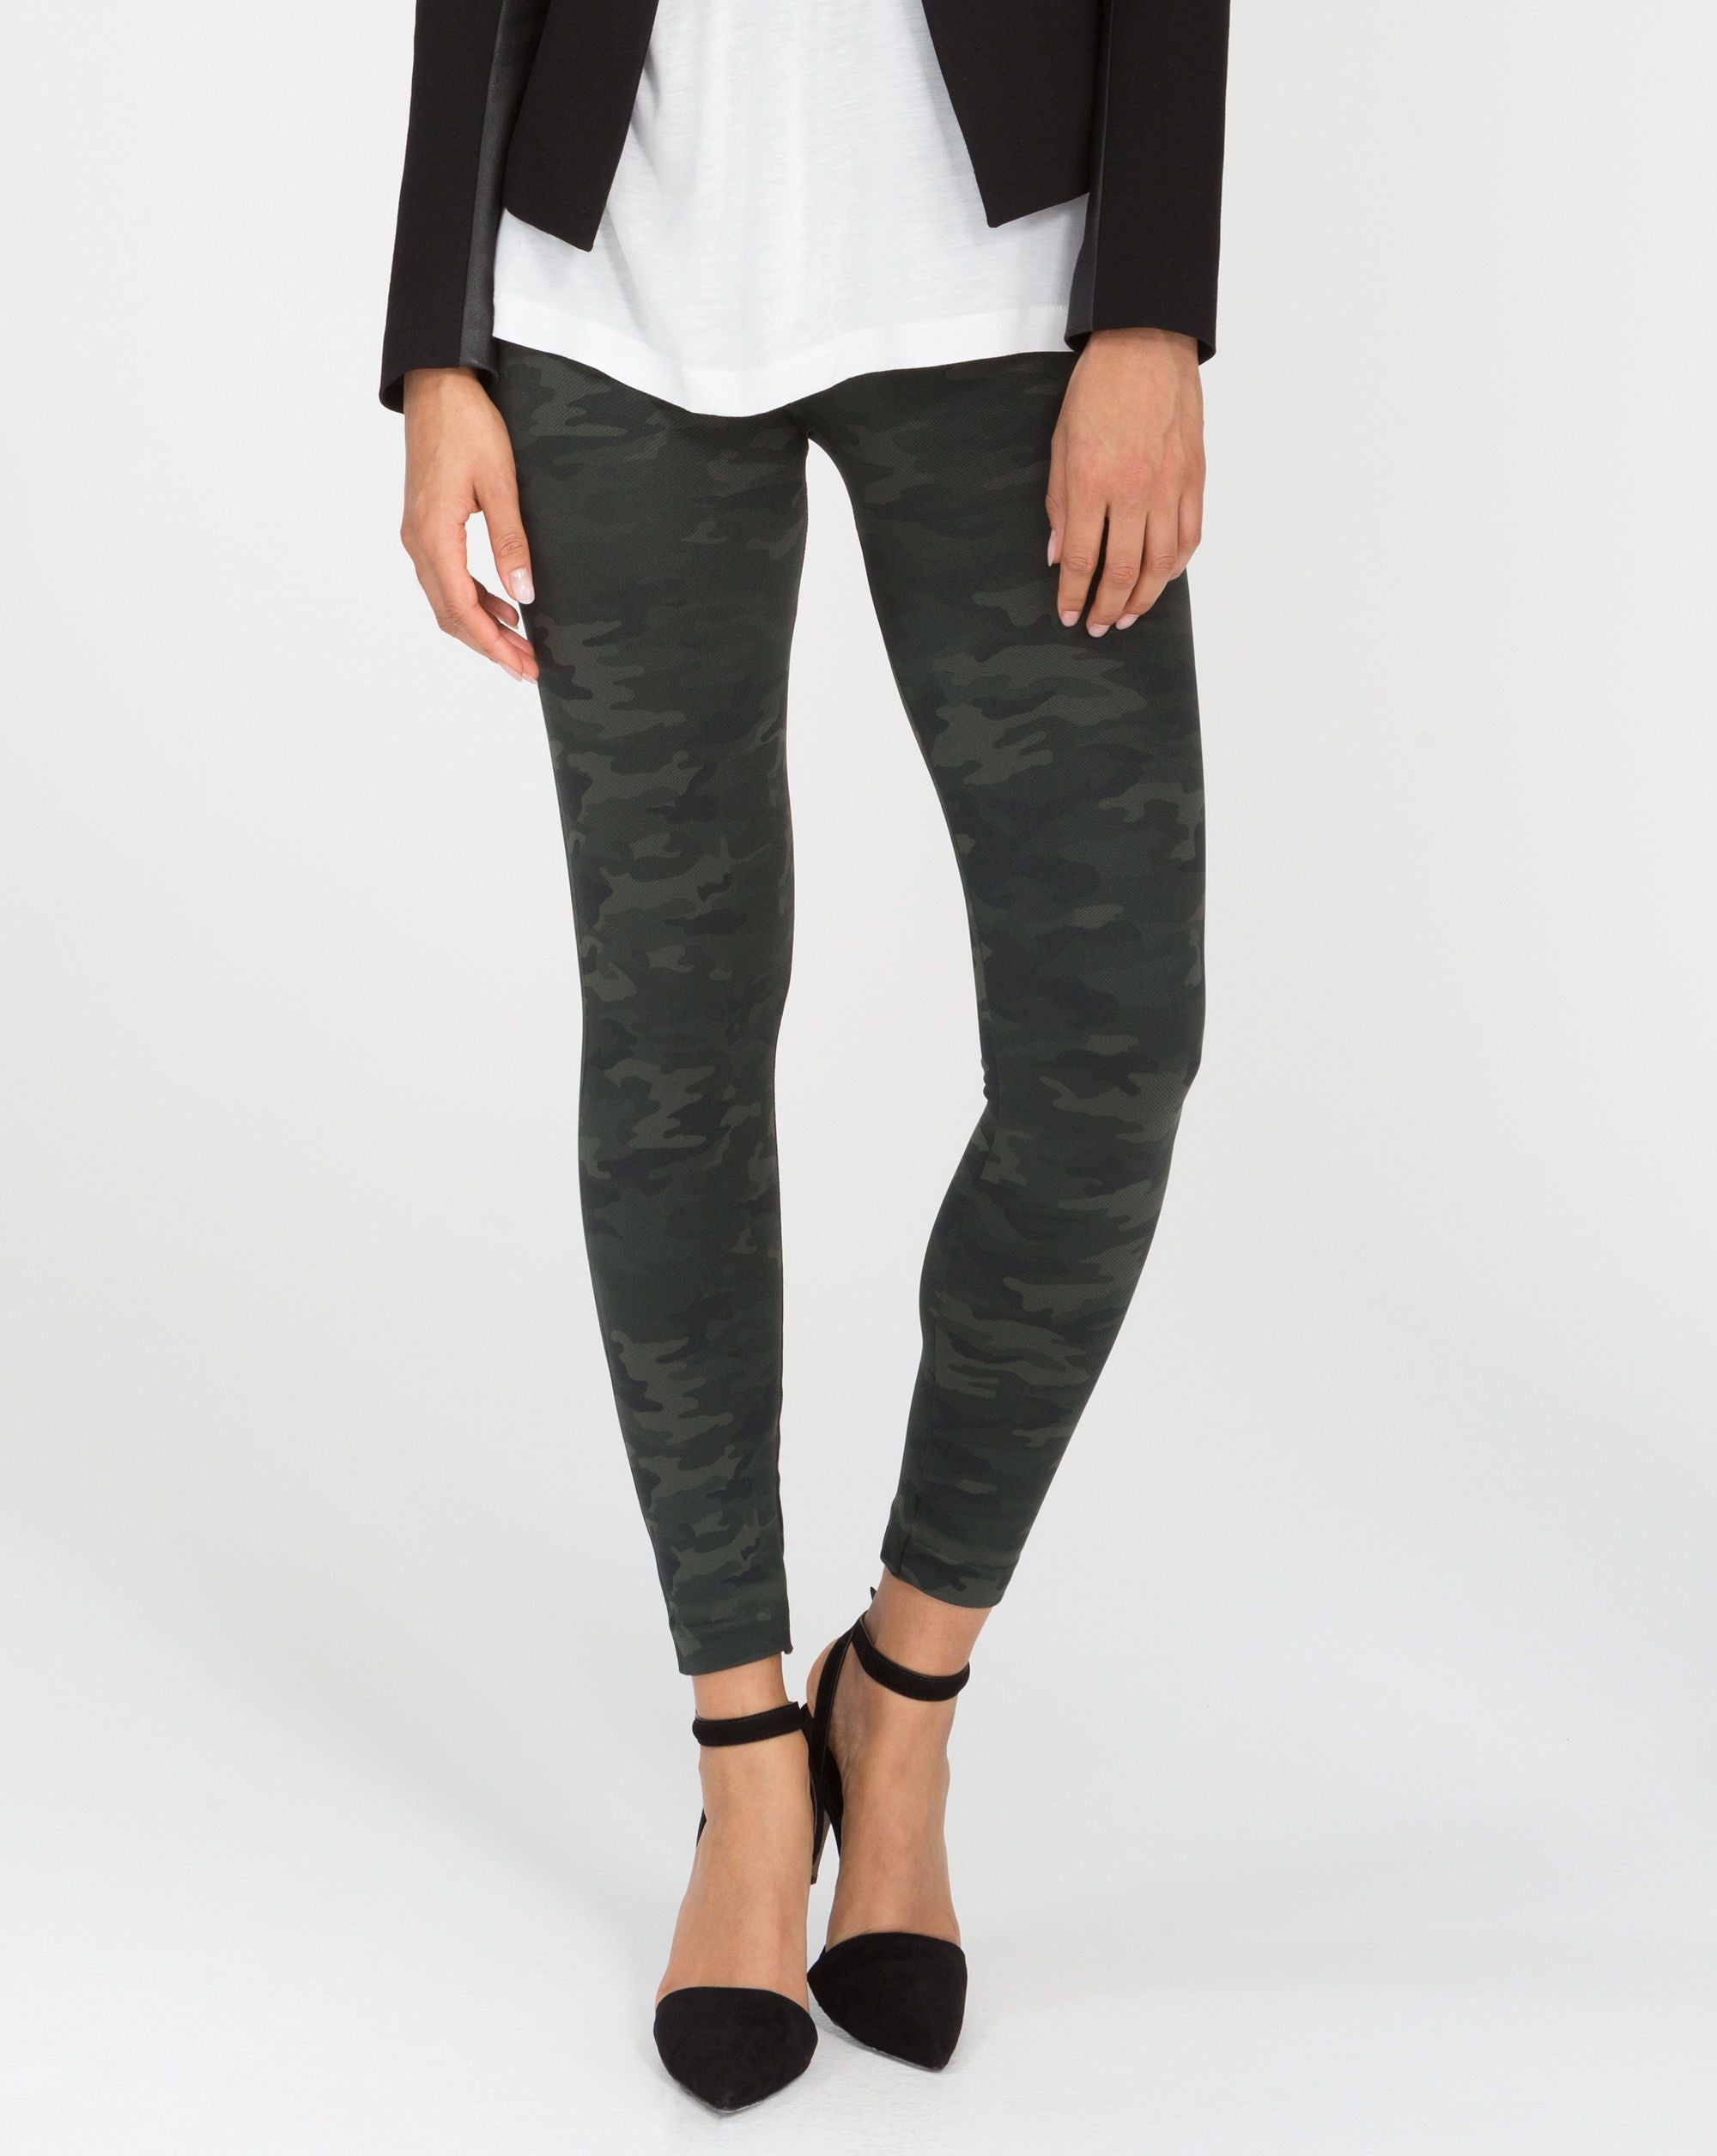 Spanx Look at Me Now Seamless Leggings Black Camo – The Blue